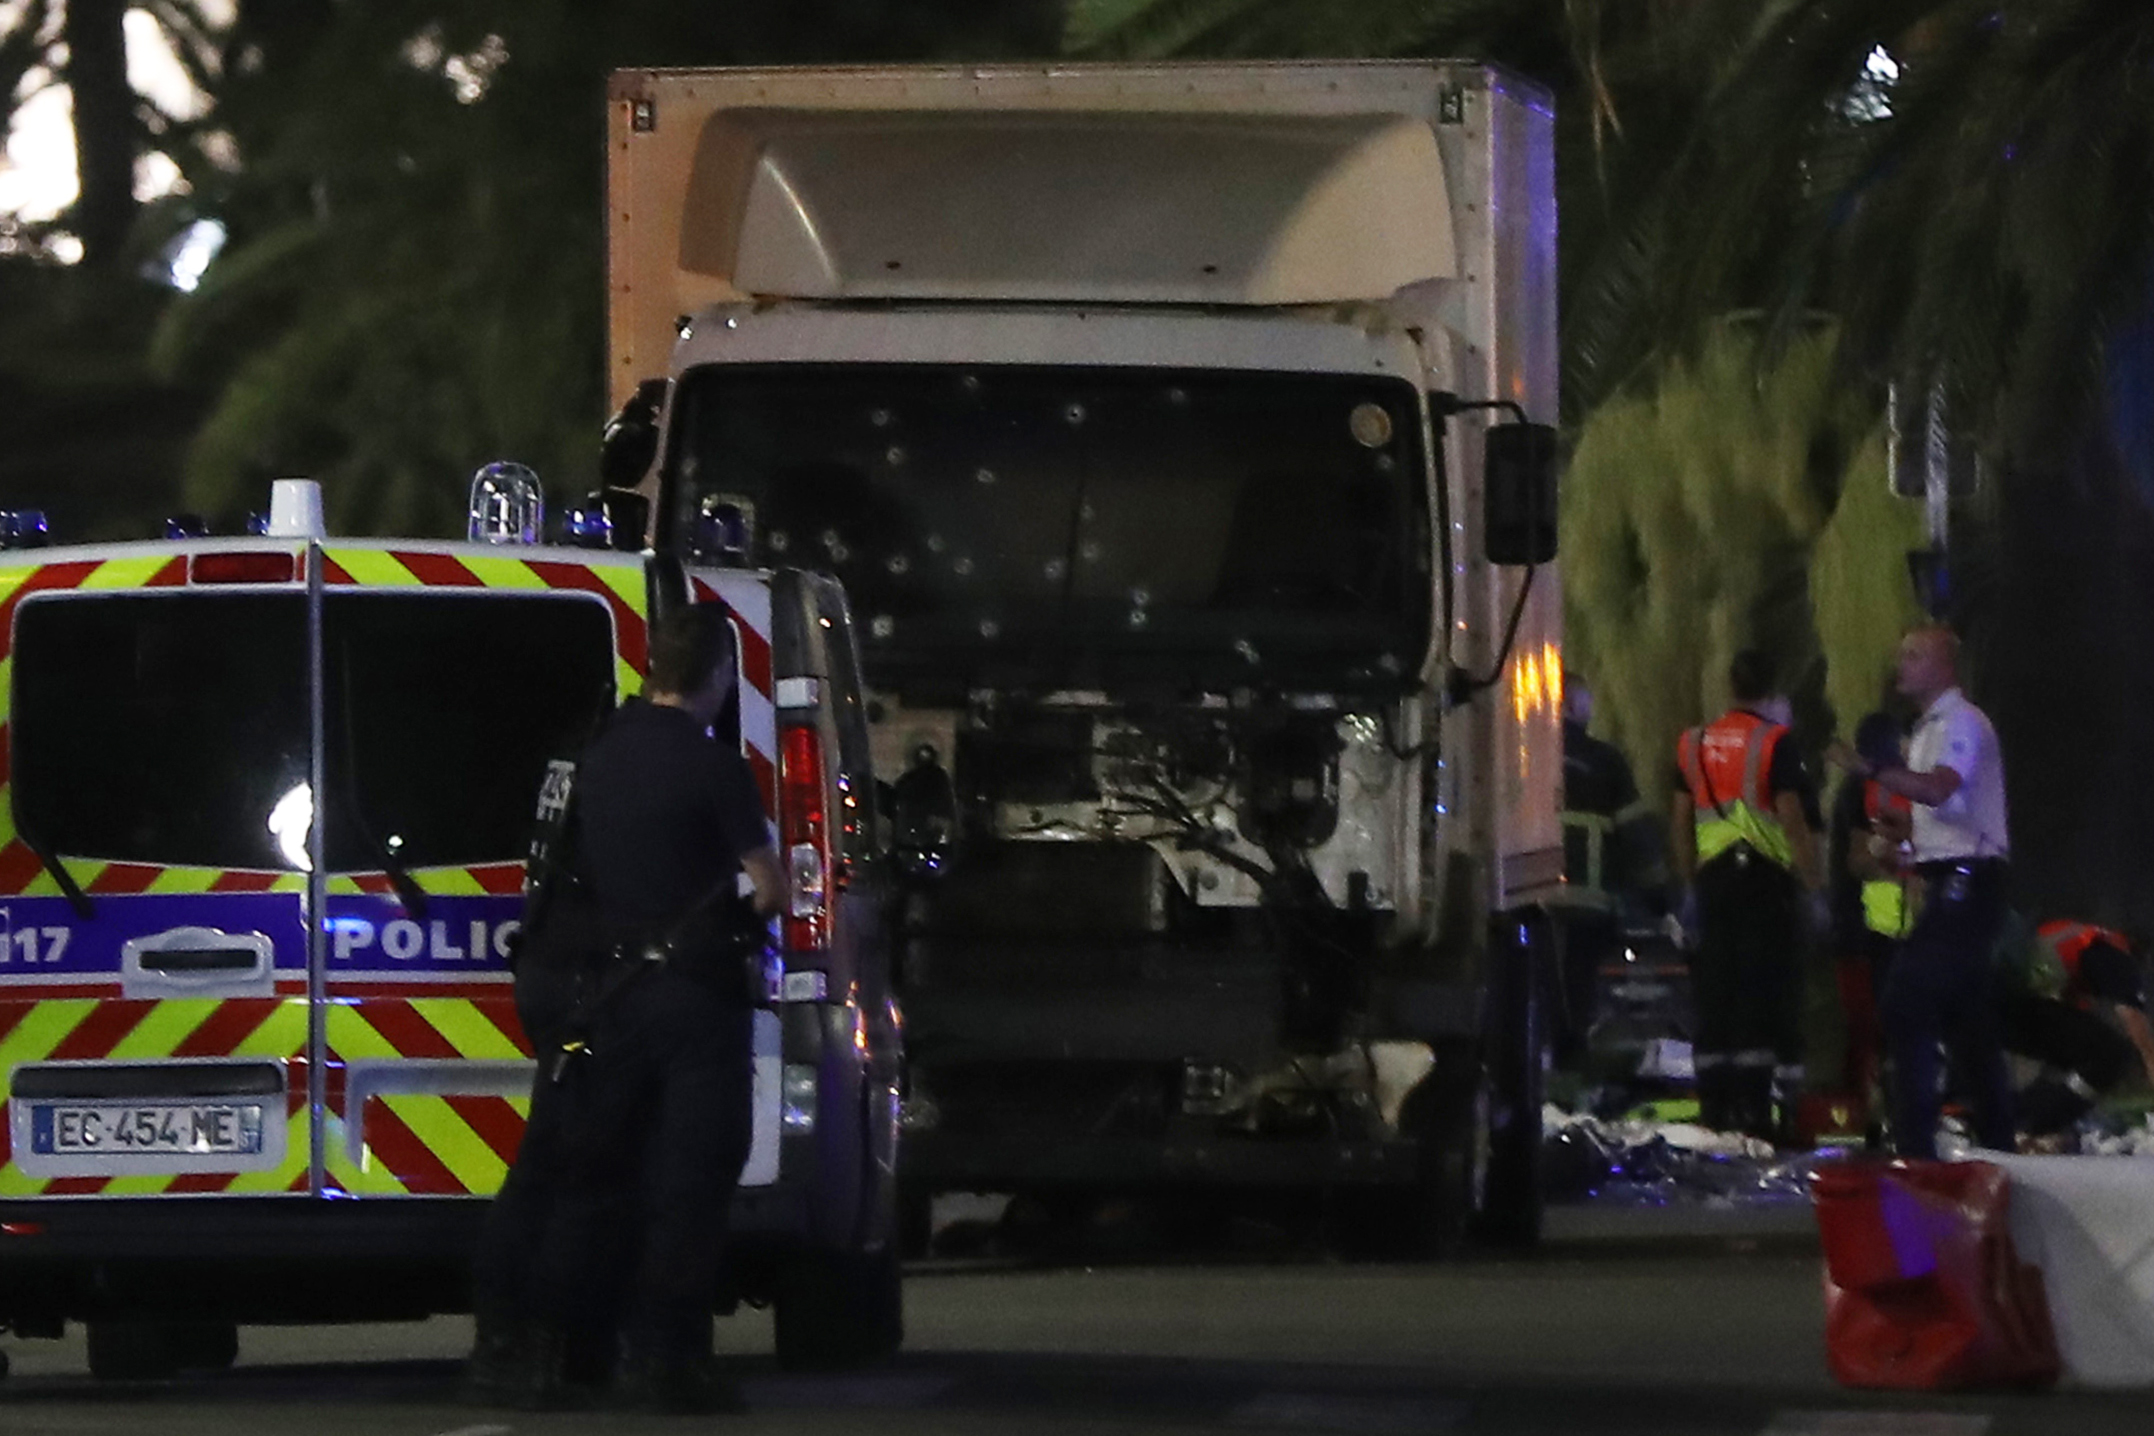 Bullet holes pockmark the truck used in the Nice attack.